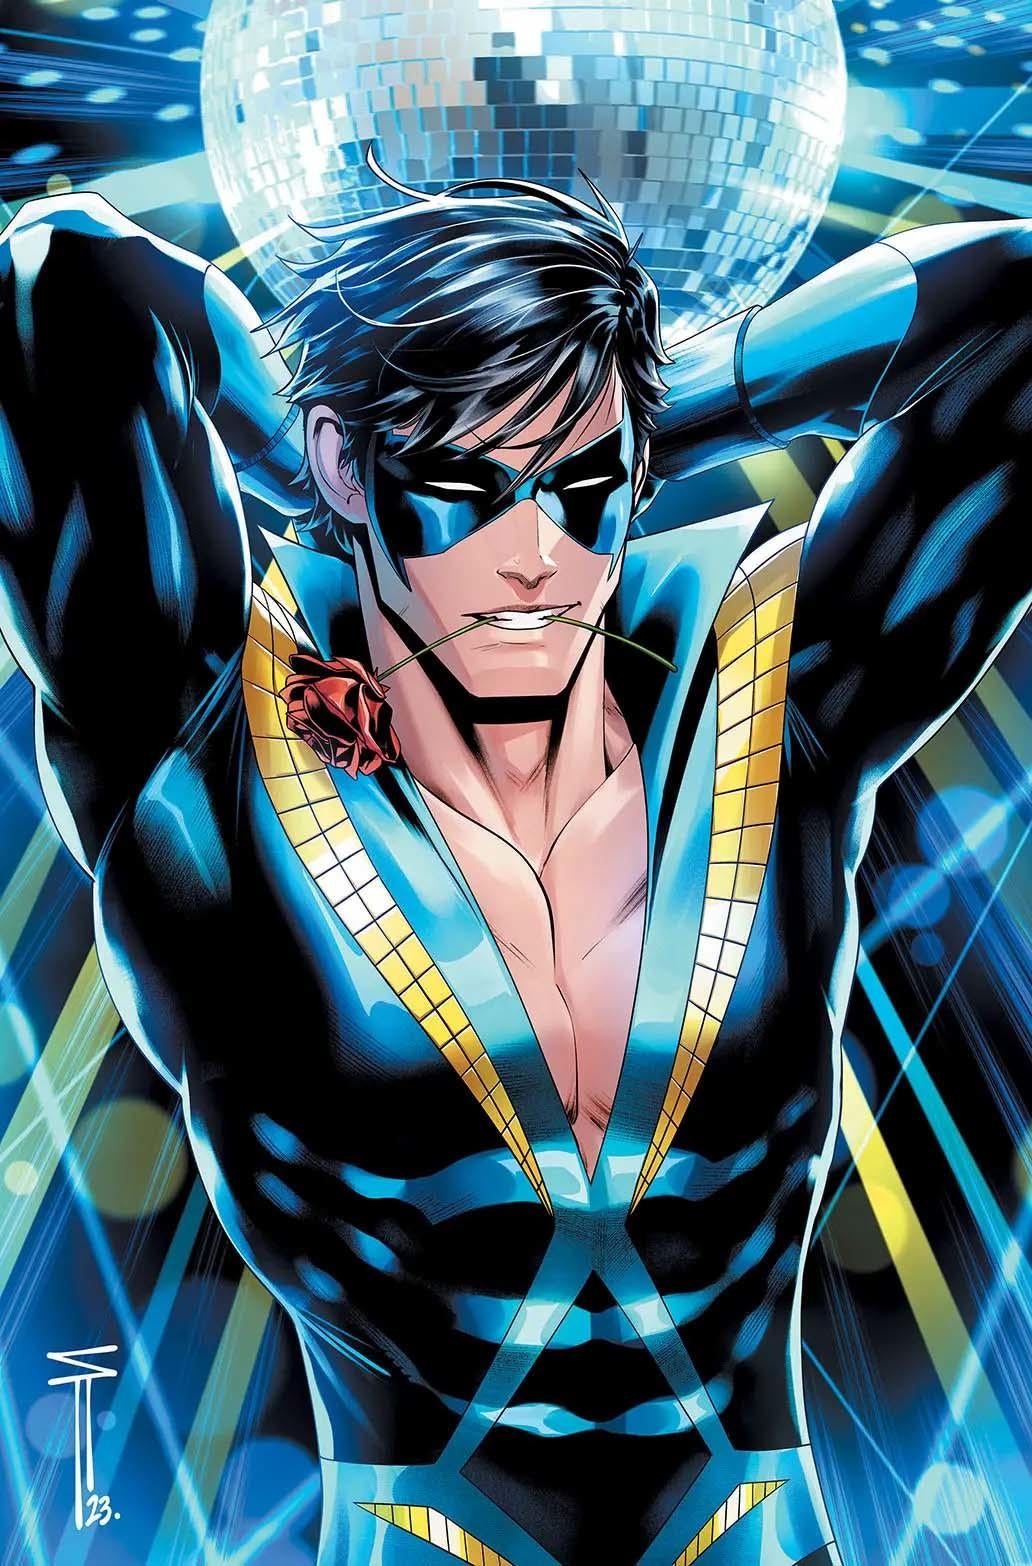 nightwing-113-open-to-order-variant-acuna.jpg